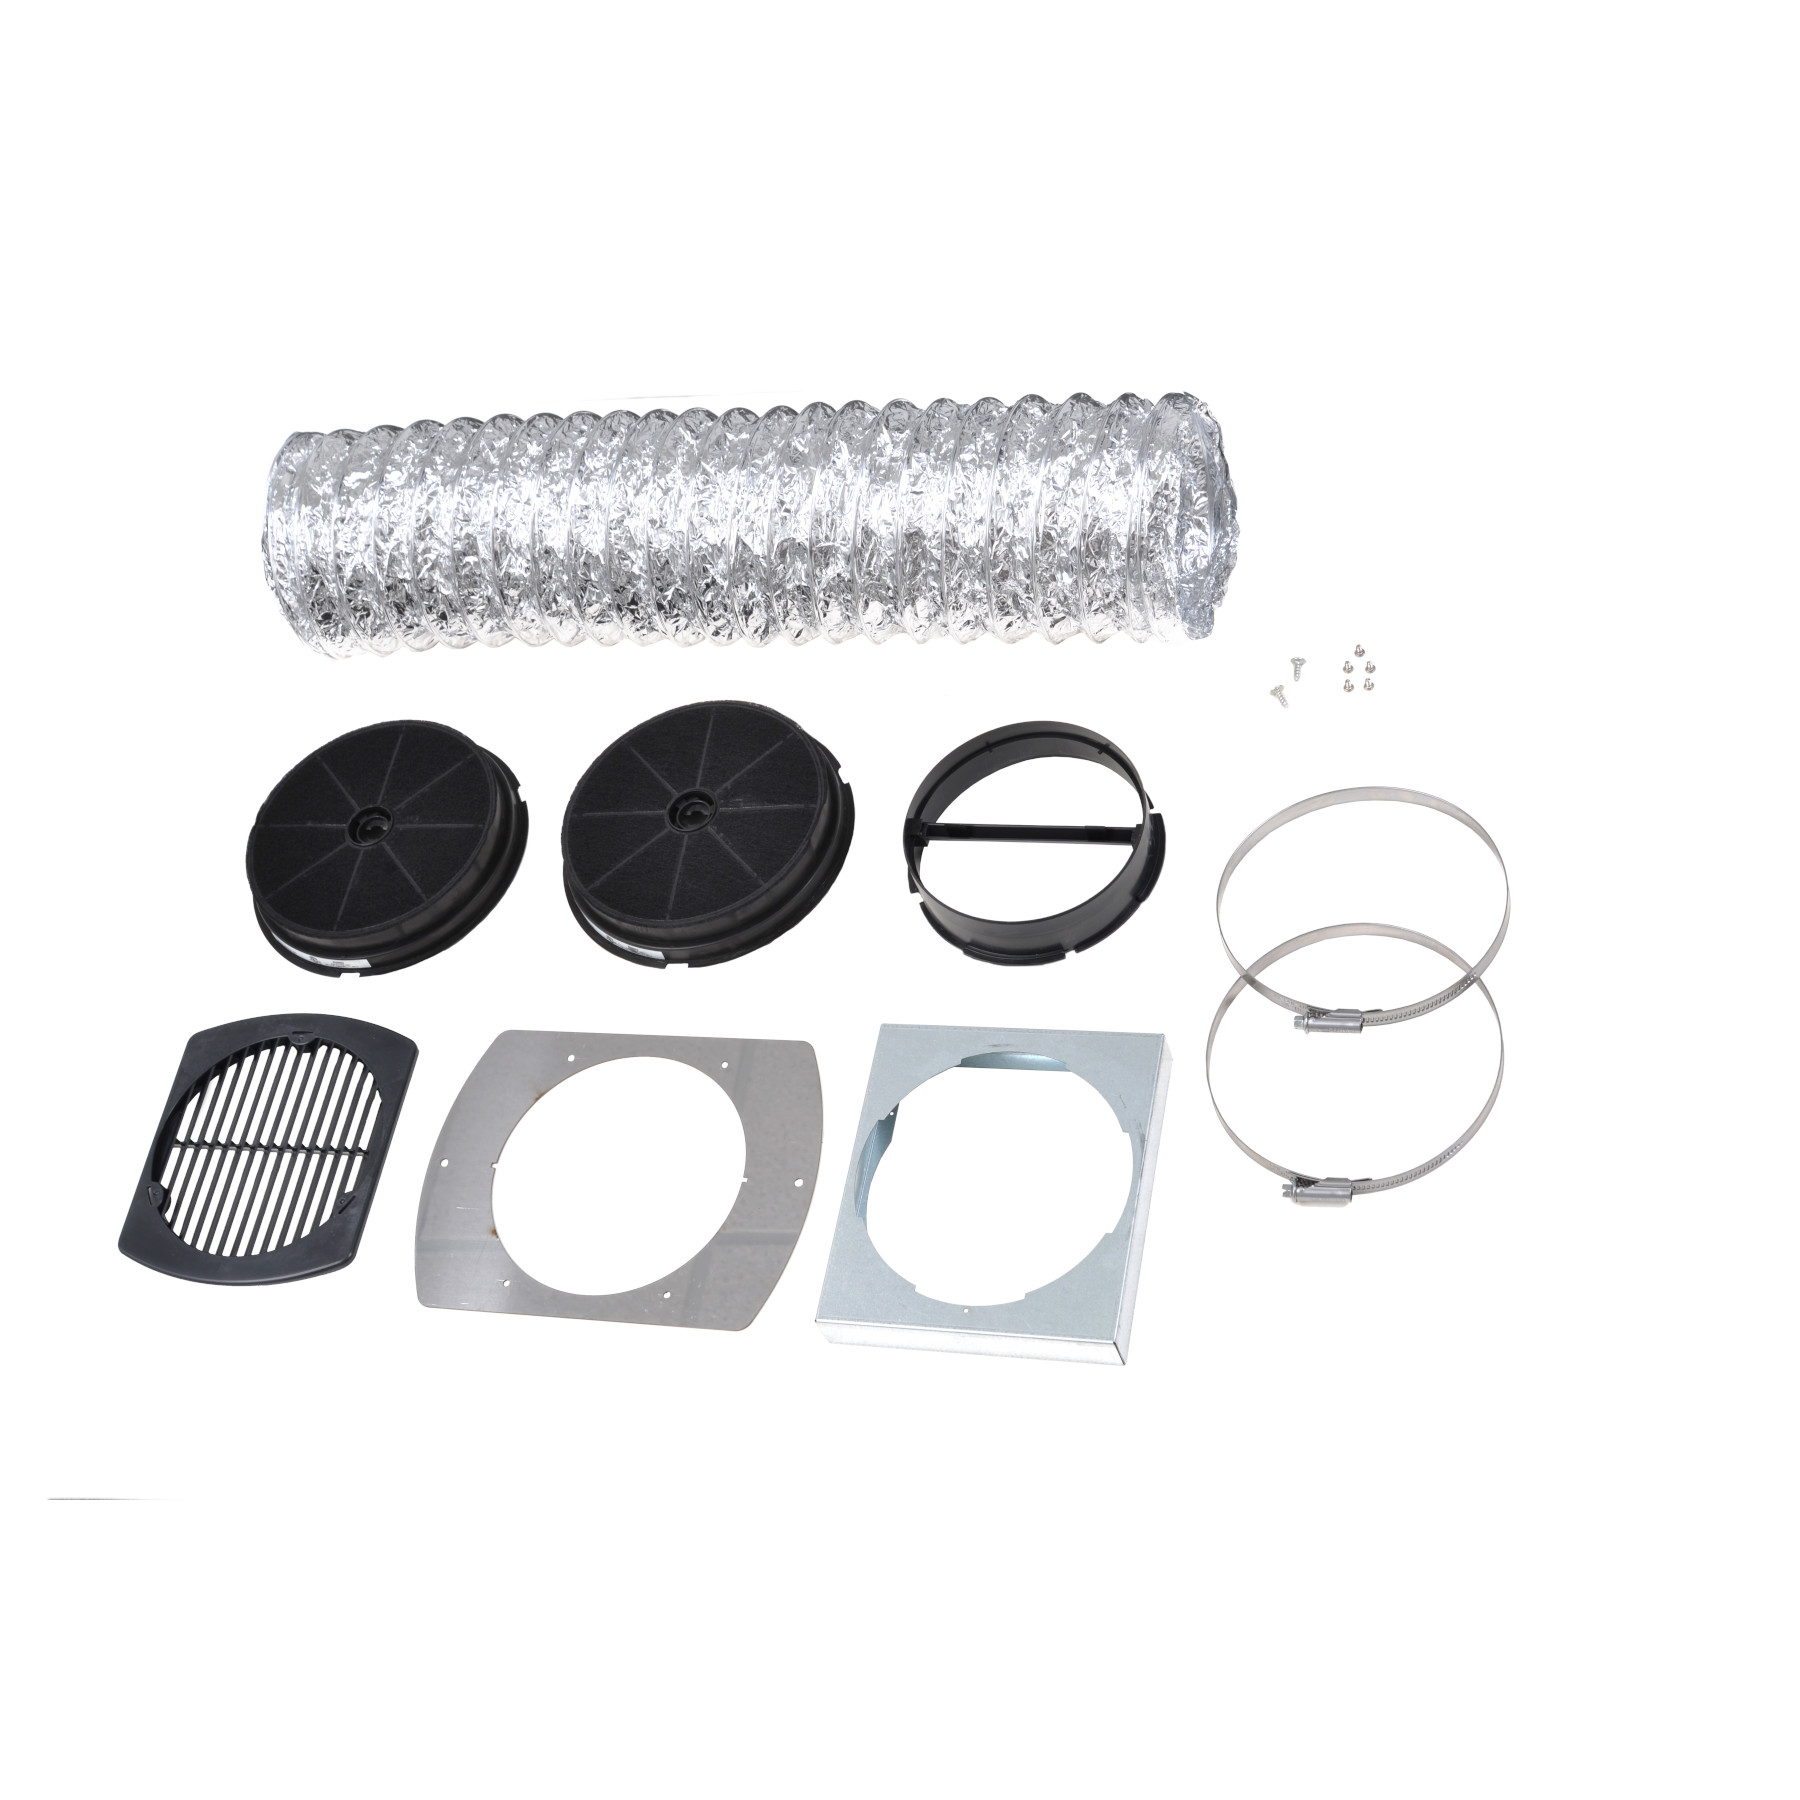 Broan 360NDK Optional Non-duct Recirculation Kit For Pm390ssp Power Pack 